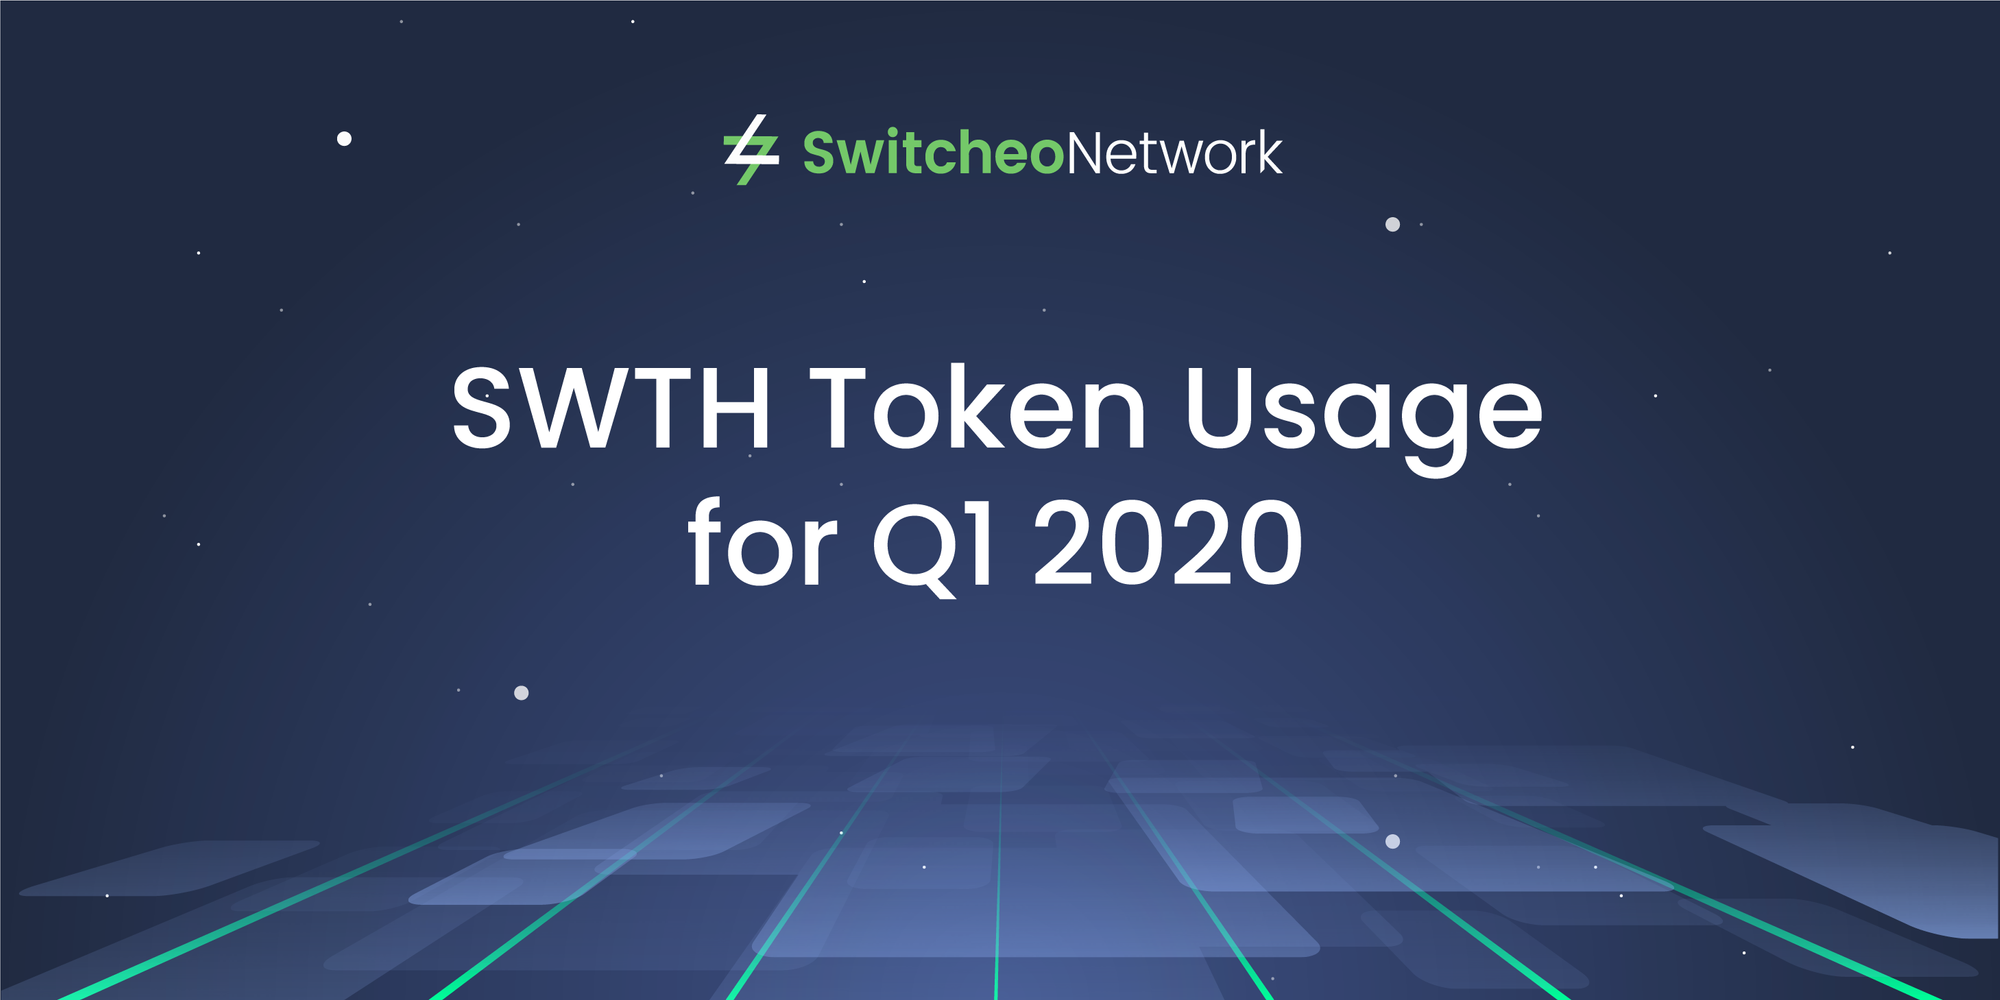 SWTH Token Usage for Q1 2020